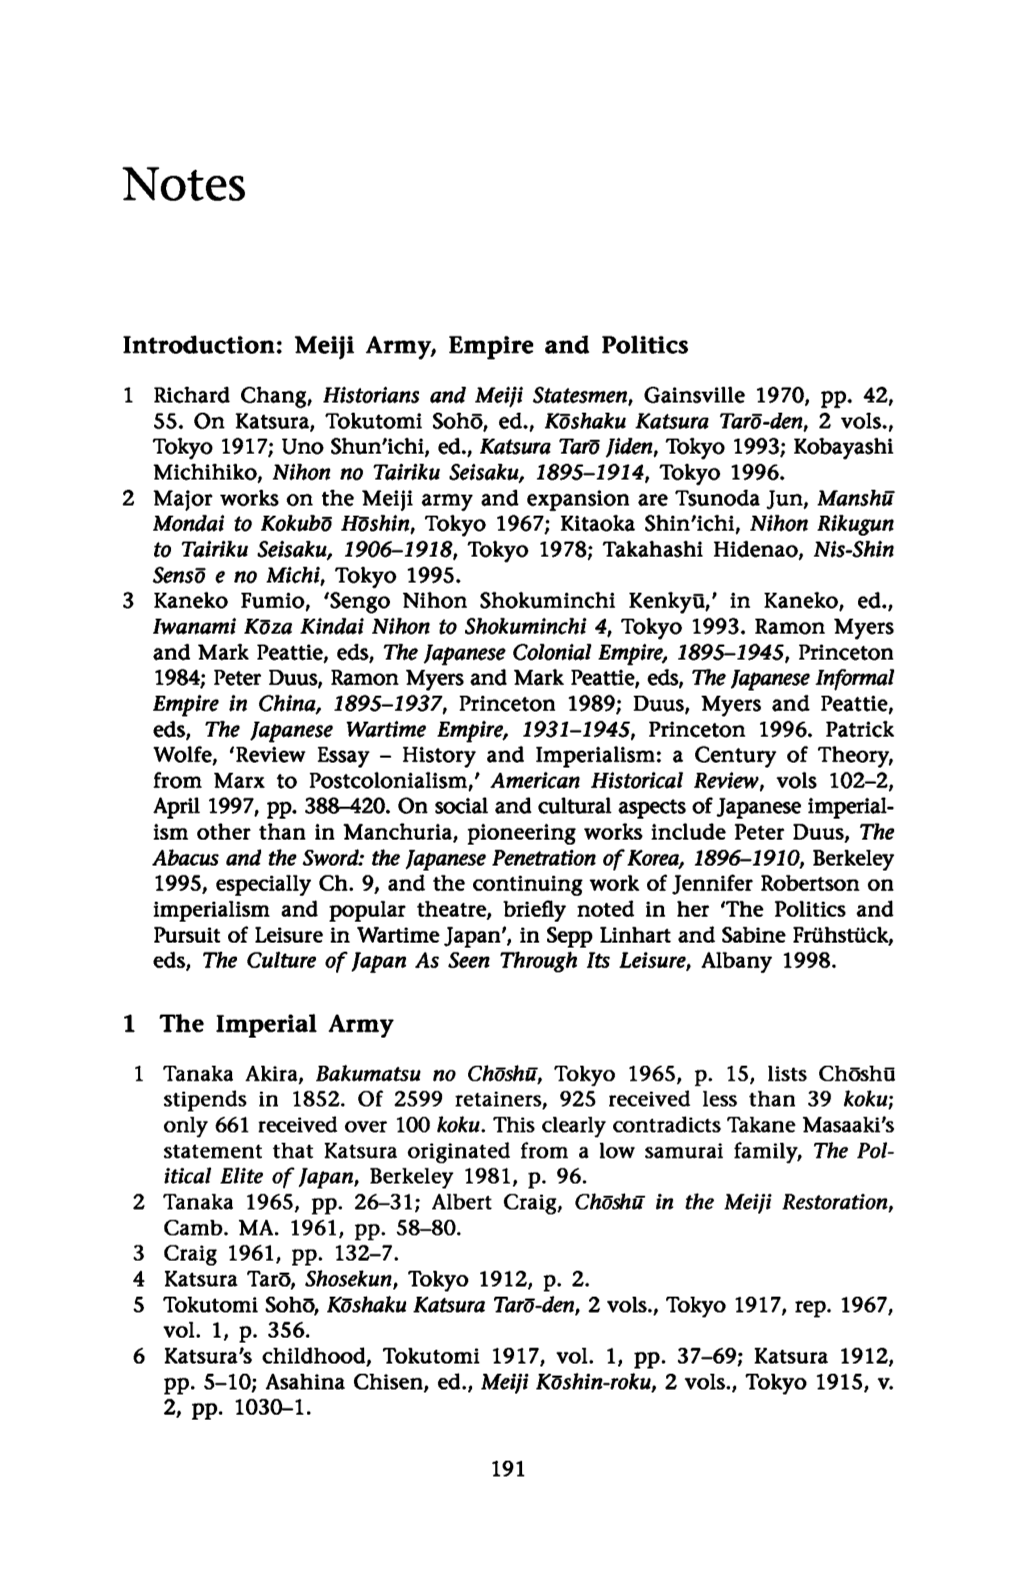 Introduction: Meiji Army, Empire and Politics 1 the Imperial Army